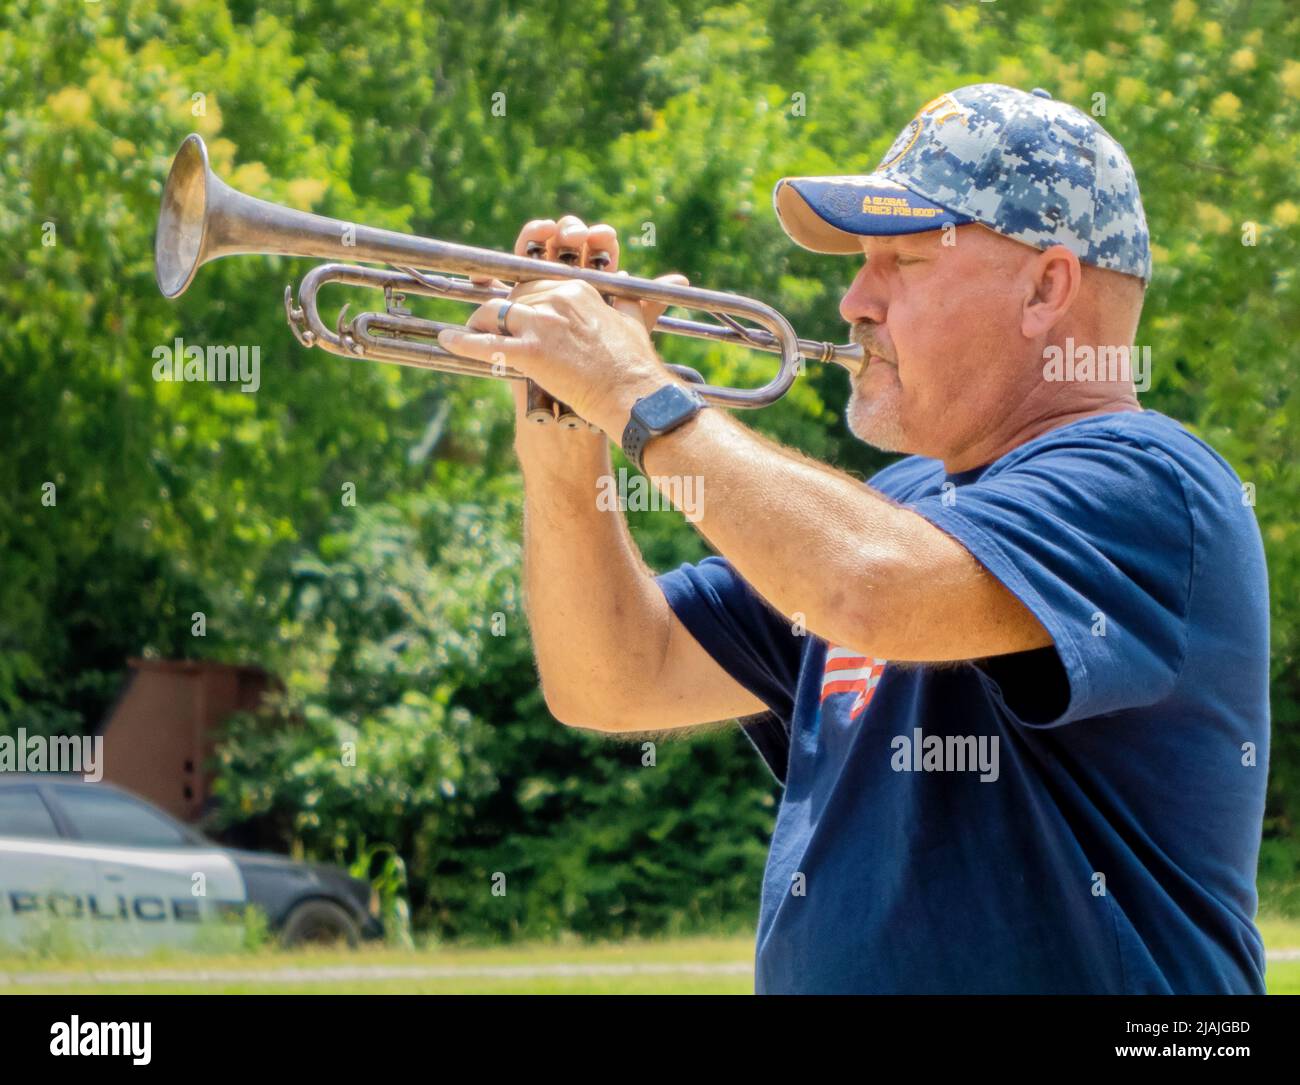 United States Navy veteran Roger Tabor plays 'Taps' on his trumpet as part of the Taps Across America national moment of remembrance on Memorial Day, Monday, May 30, 2022 at the Jake's Place park pavilion in Oak Point, Denton County, TX, USA. A 3 p.m. local time moment of remembrance on Memorial Day began being celebrated nationally in 2000, but Taps Across America is a newer tradition tracing its roots to 2020 when picnics, parades and other public Memorial Day celebrations had to be cancelled due to the COVID-19 pandemic. (Apex MediaWire Photo by Timothy J. Jones) Stock Photo